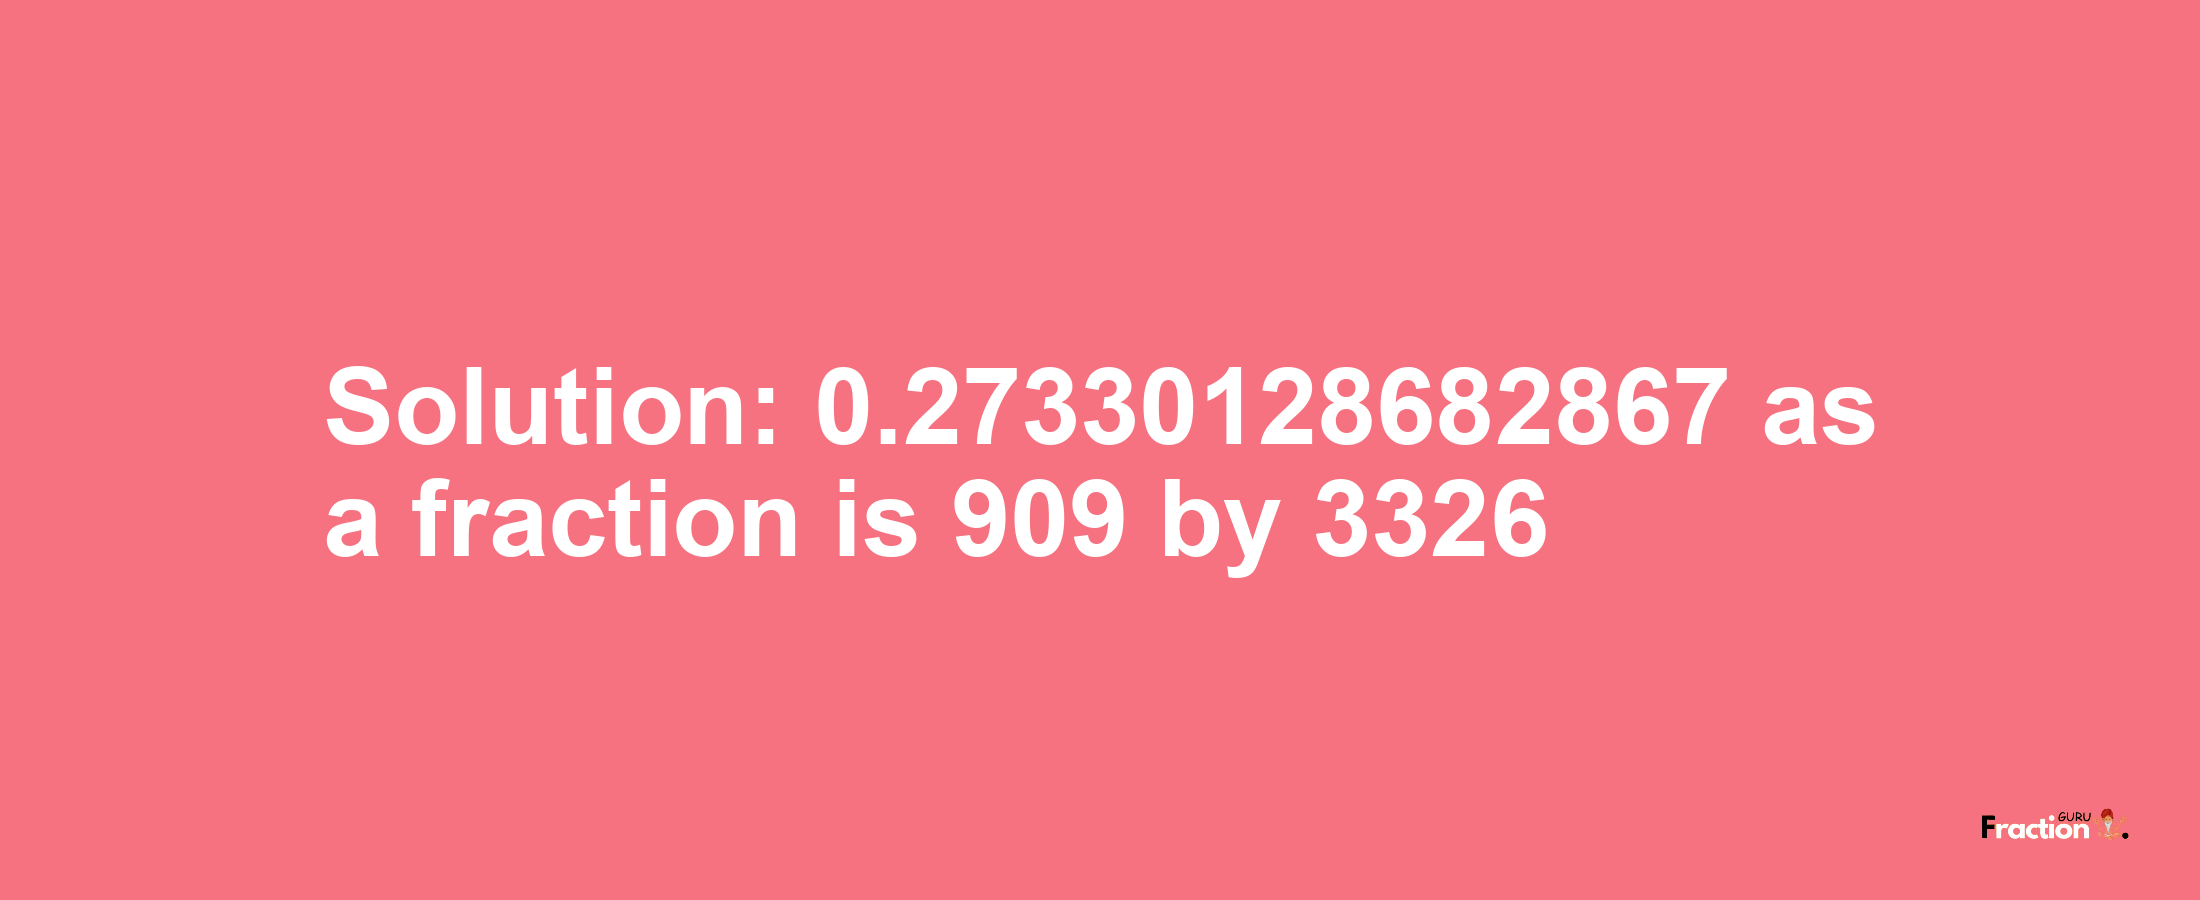 Solution:0.27330128682867 as a fraction is 909/3326